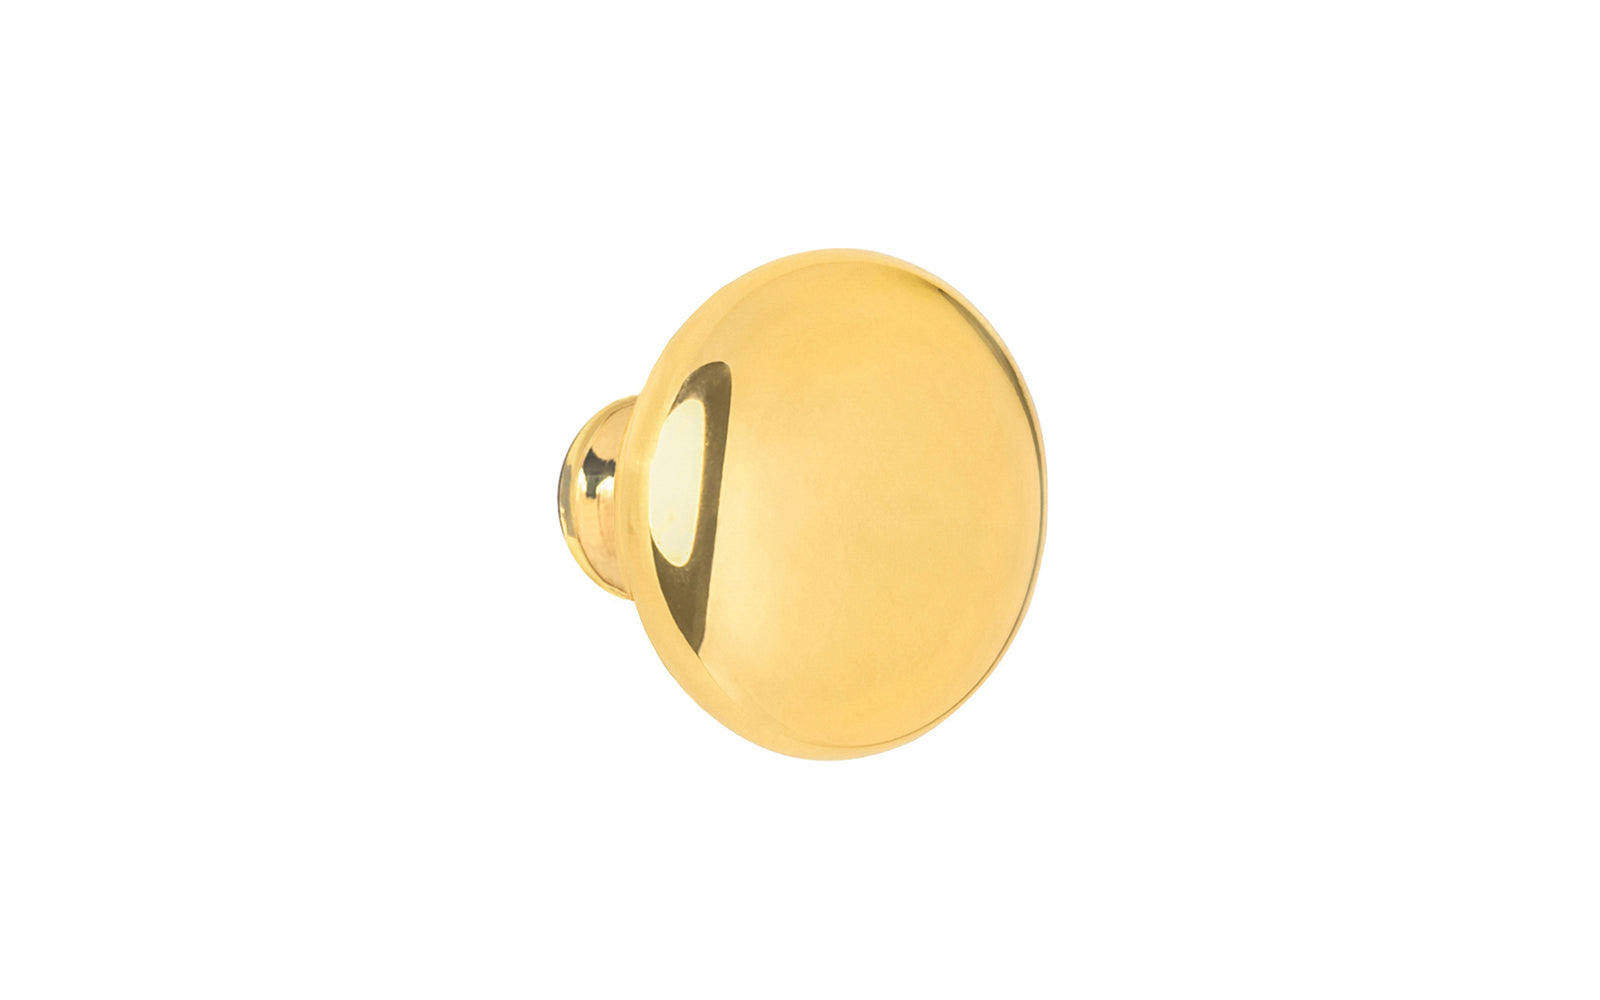 Vintage-style Hardware · Classic & traditional solid core unlacquered solid brass cabinet knob. 5/8" diameter knob. Made of a quality solid brass core, this stylish knob has a smooth & weighty feel & comes with an optional rosette backplate piece. Non-lacquered brass (the unlacquered brass will patina over time).